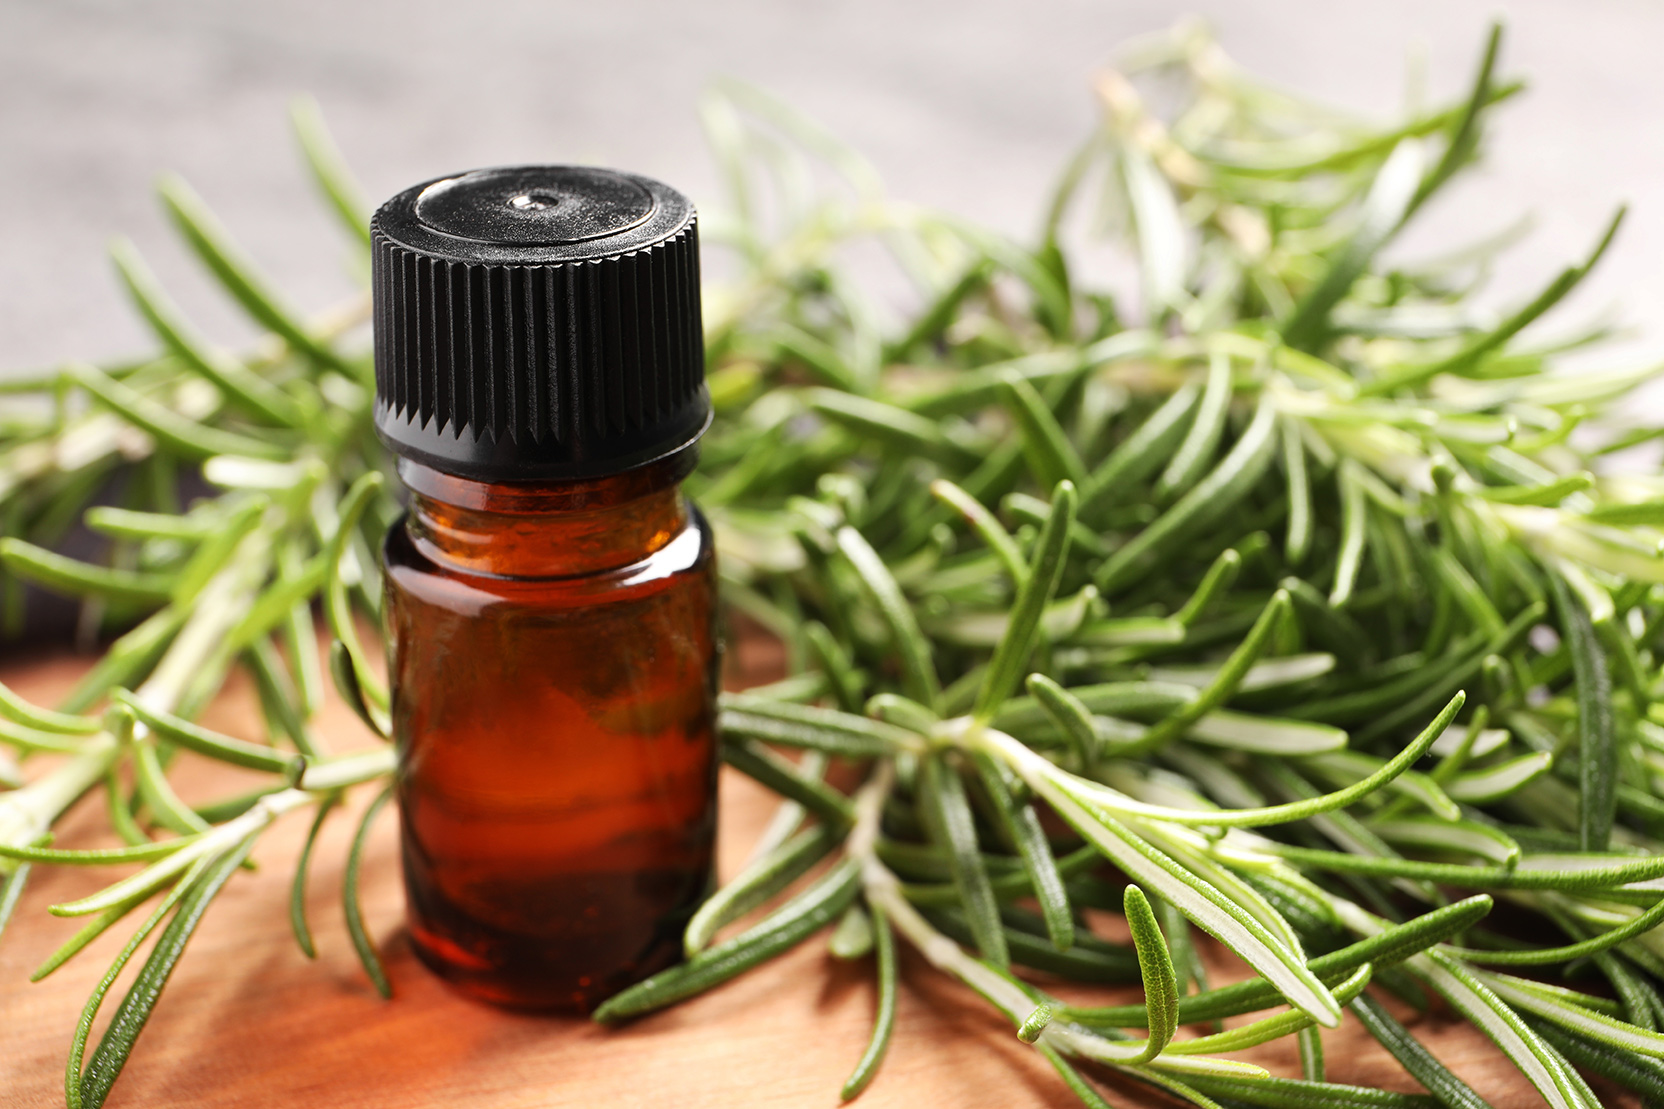 An essential oil bottle surrounded by rosemary sprigs